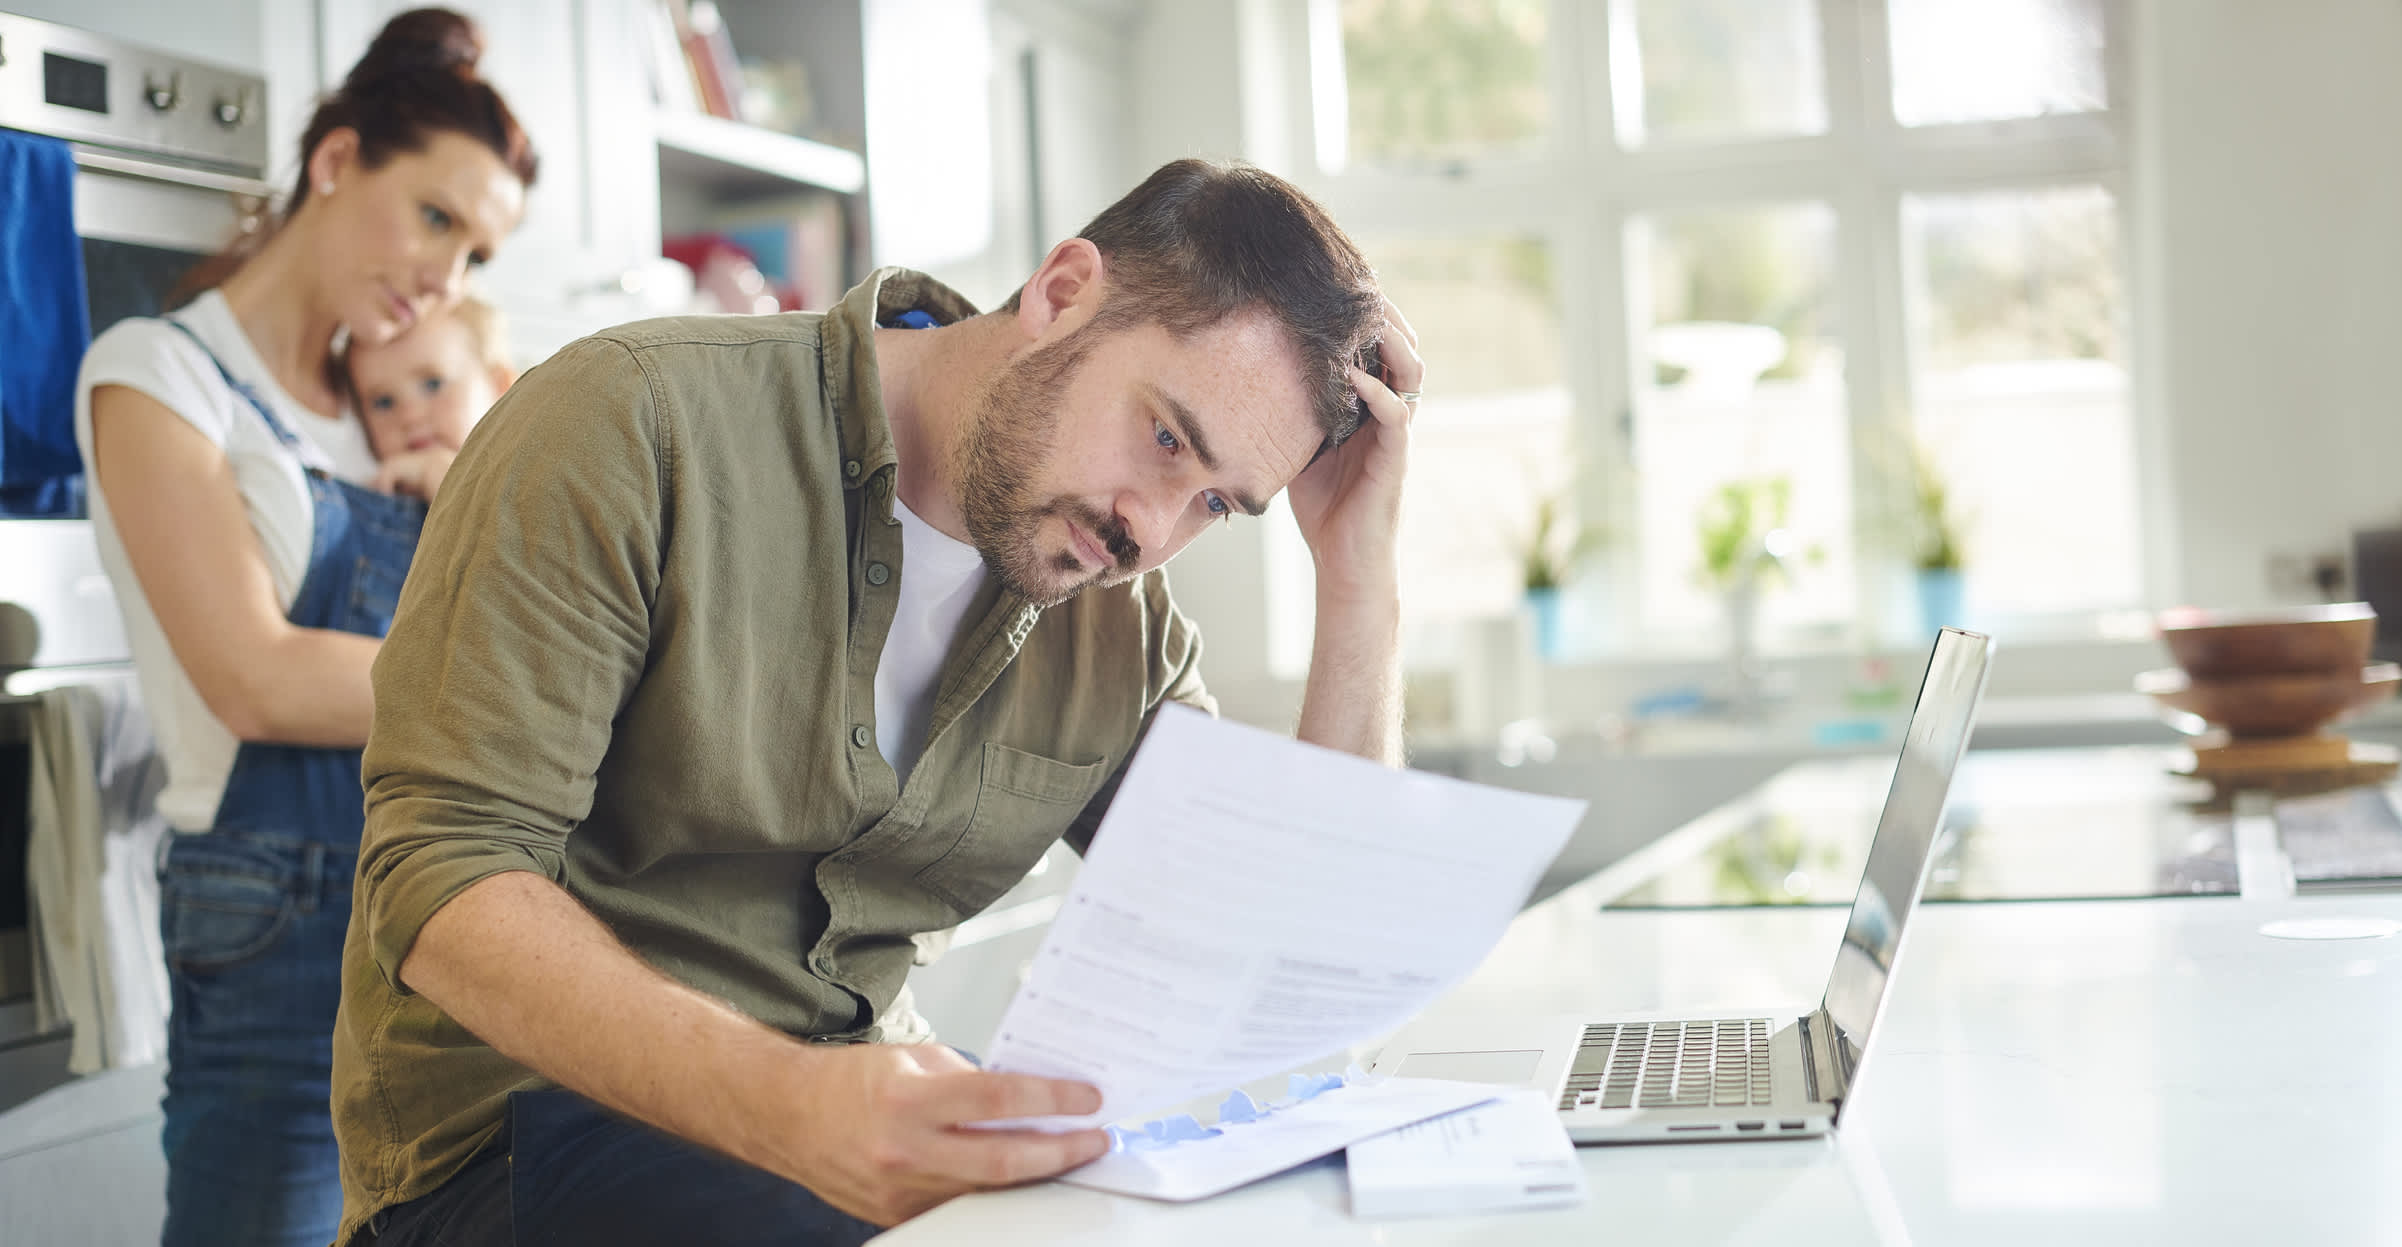 Financial anxiety is high. Why financial planners may miss the signs